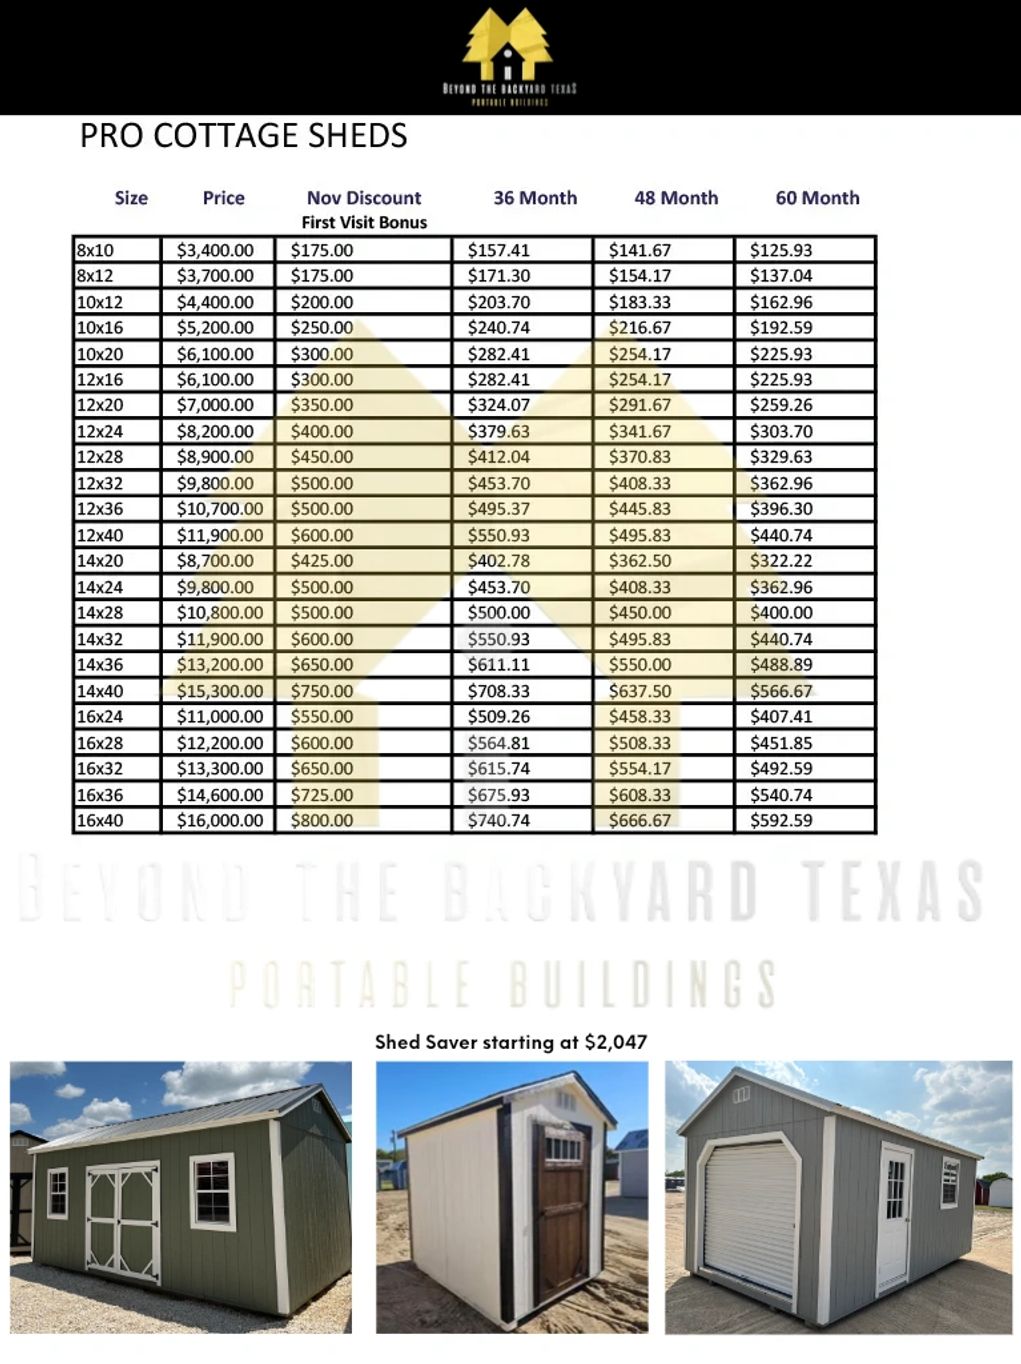 Price listings for pro cottage sheds.